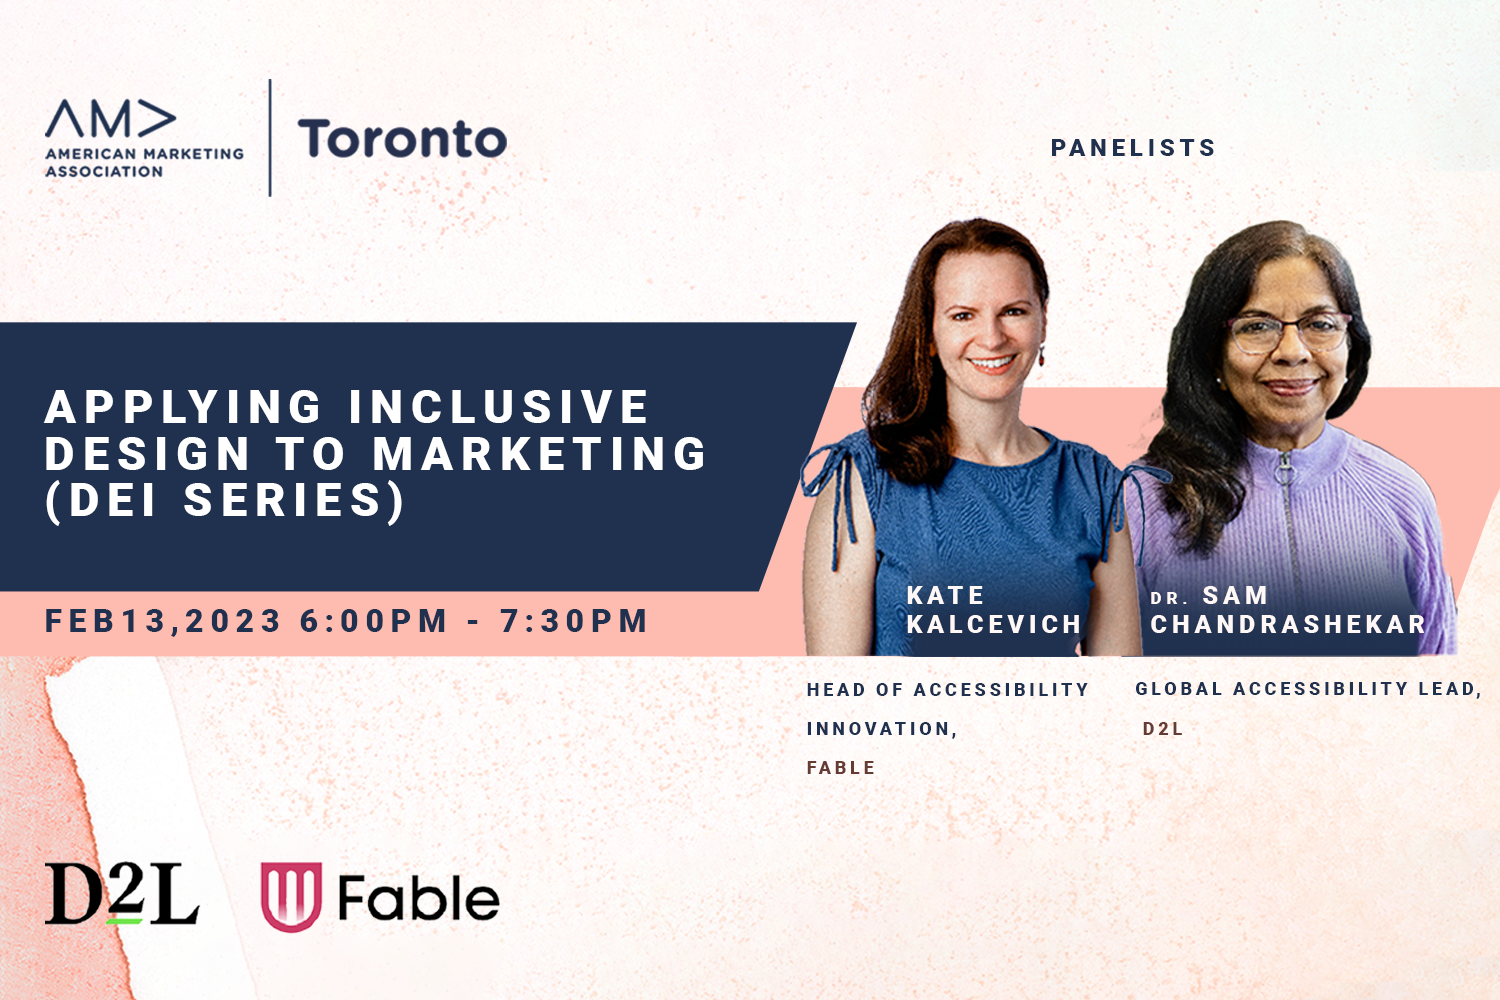 American Marketing Association – Toronto. Applying inclusive design to marketing (DEI series) Feb 13, 2023, 6 to 7:30pm. Panelists: Kate Kalcevich, Head of Accessibility Innovation at Fable; Dr. Sam Chandrashekar, Global Accessibility Lead at D2L.